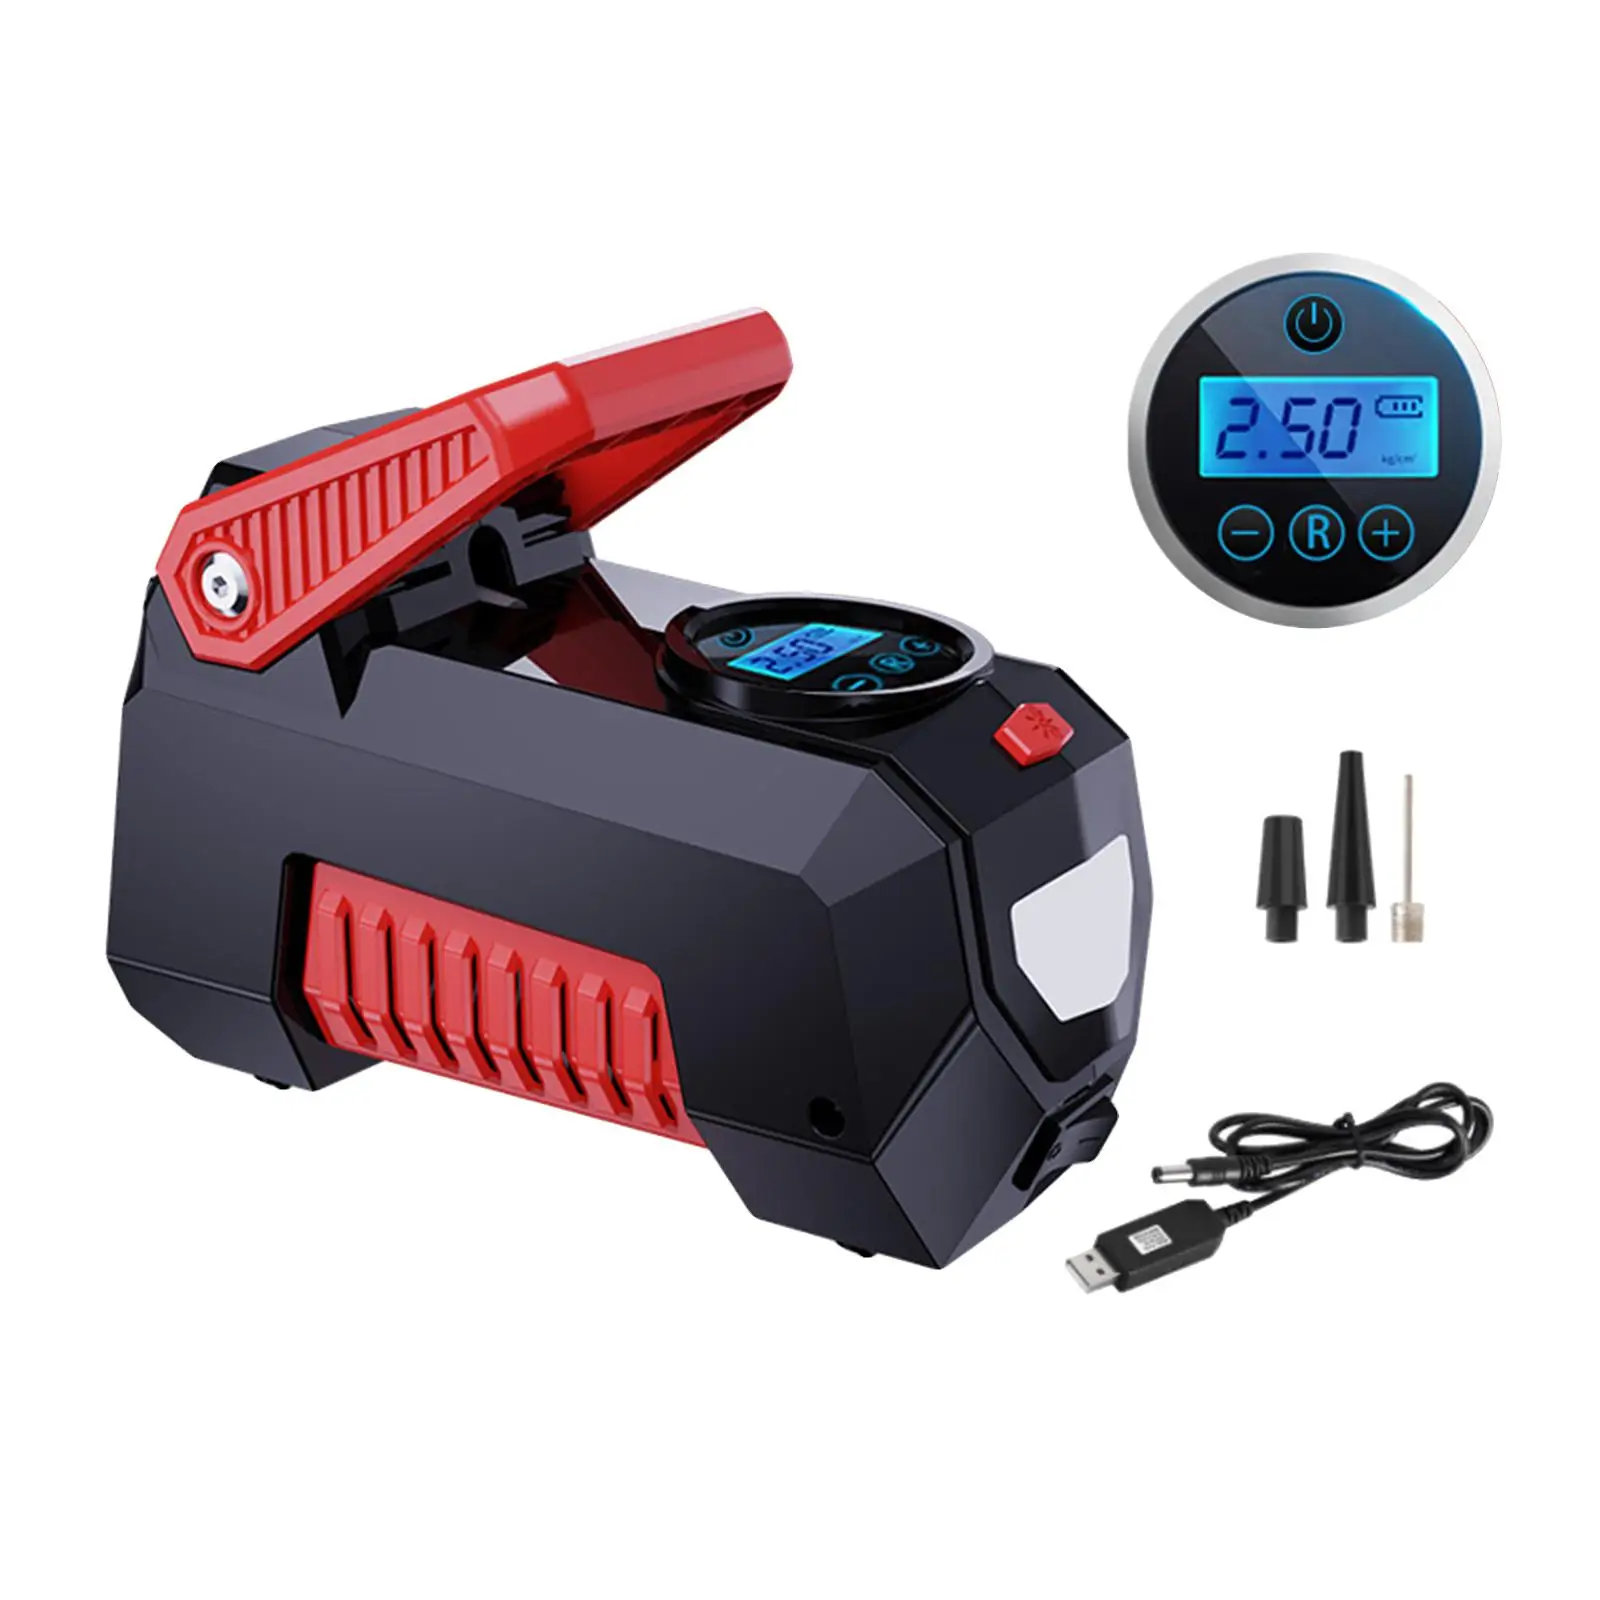 Car Air Pump Cordless Portable Fit for Other Car Tires